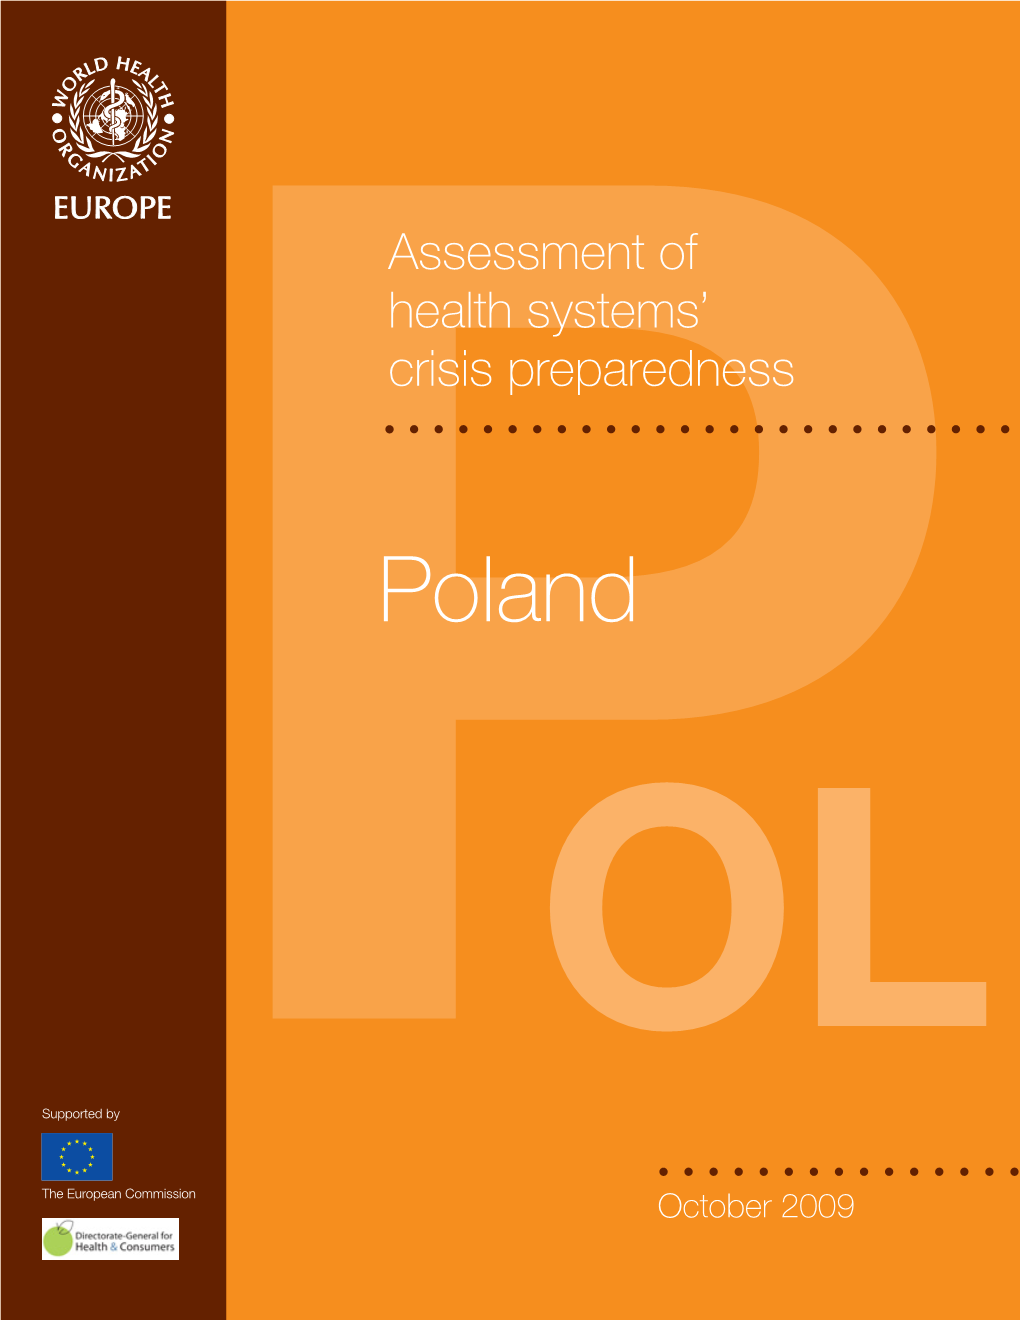 Poland OL Supported by the European Commissionp October 2009 1 Abstract